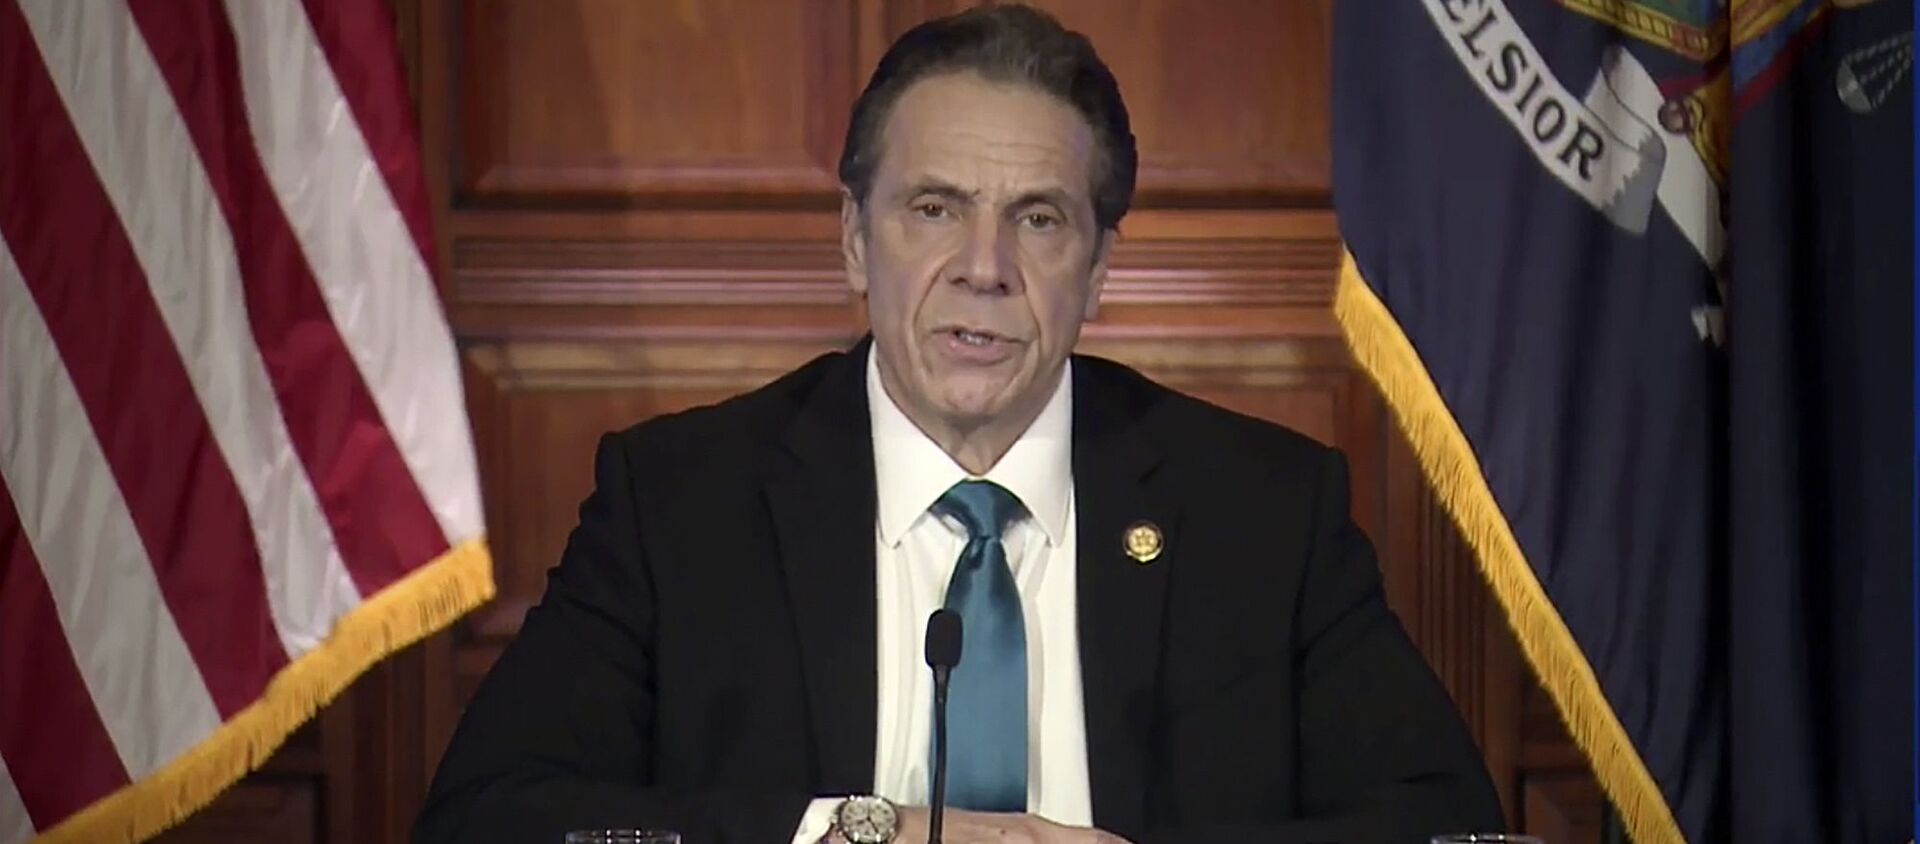 In this image taken from video, New York Gov. Andrew Cuomo speaks during a news conference Friday, Feb. 19, 2021, in Albany, N.Y. - Sputnik International, 1920, 14.03.2021